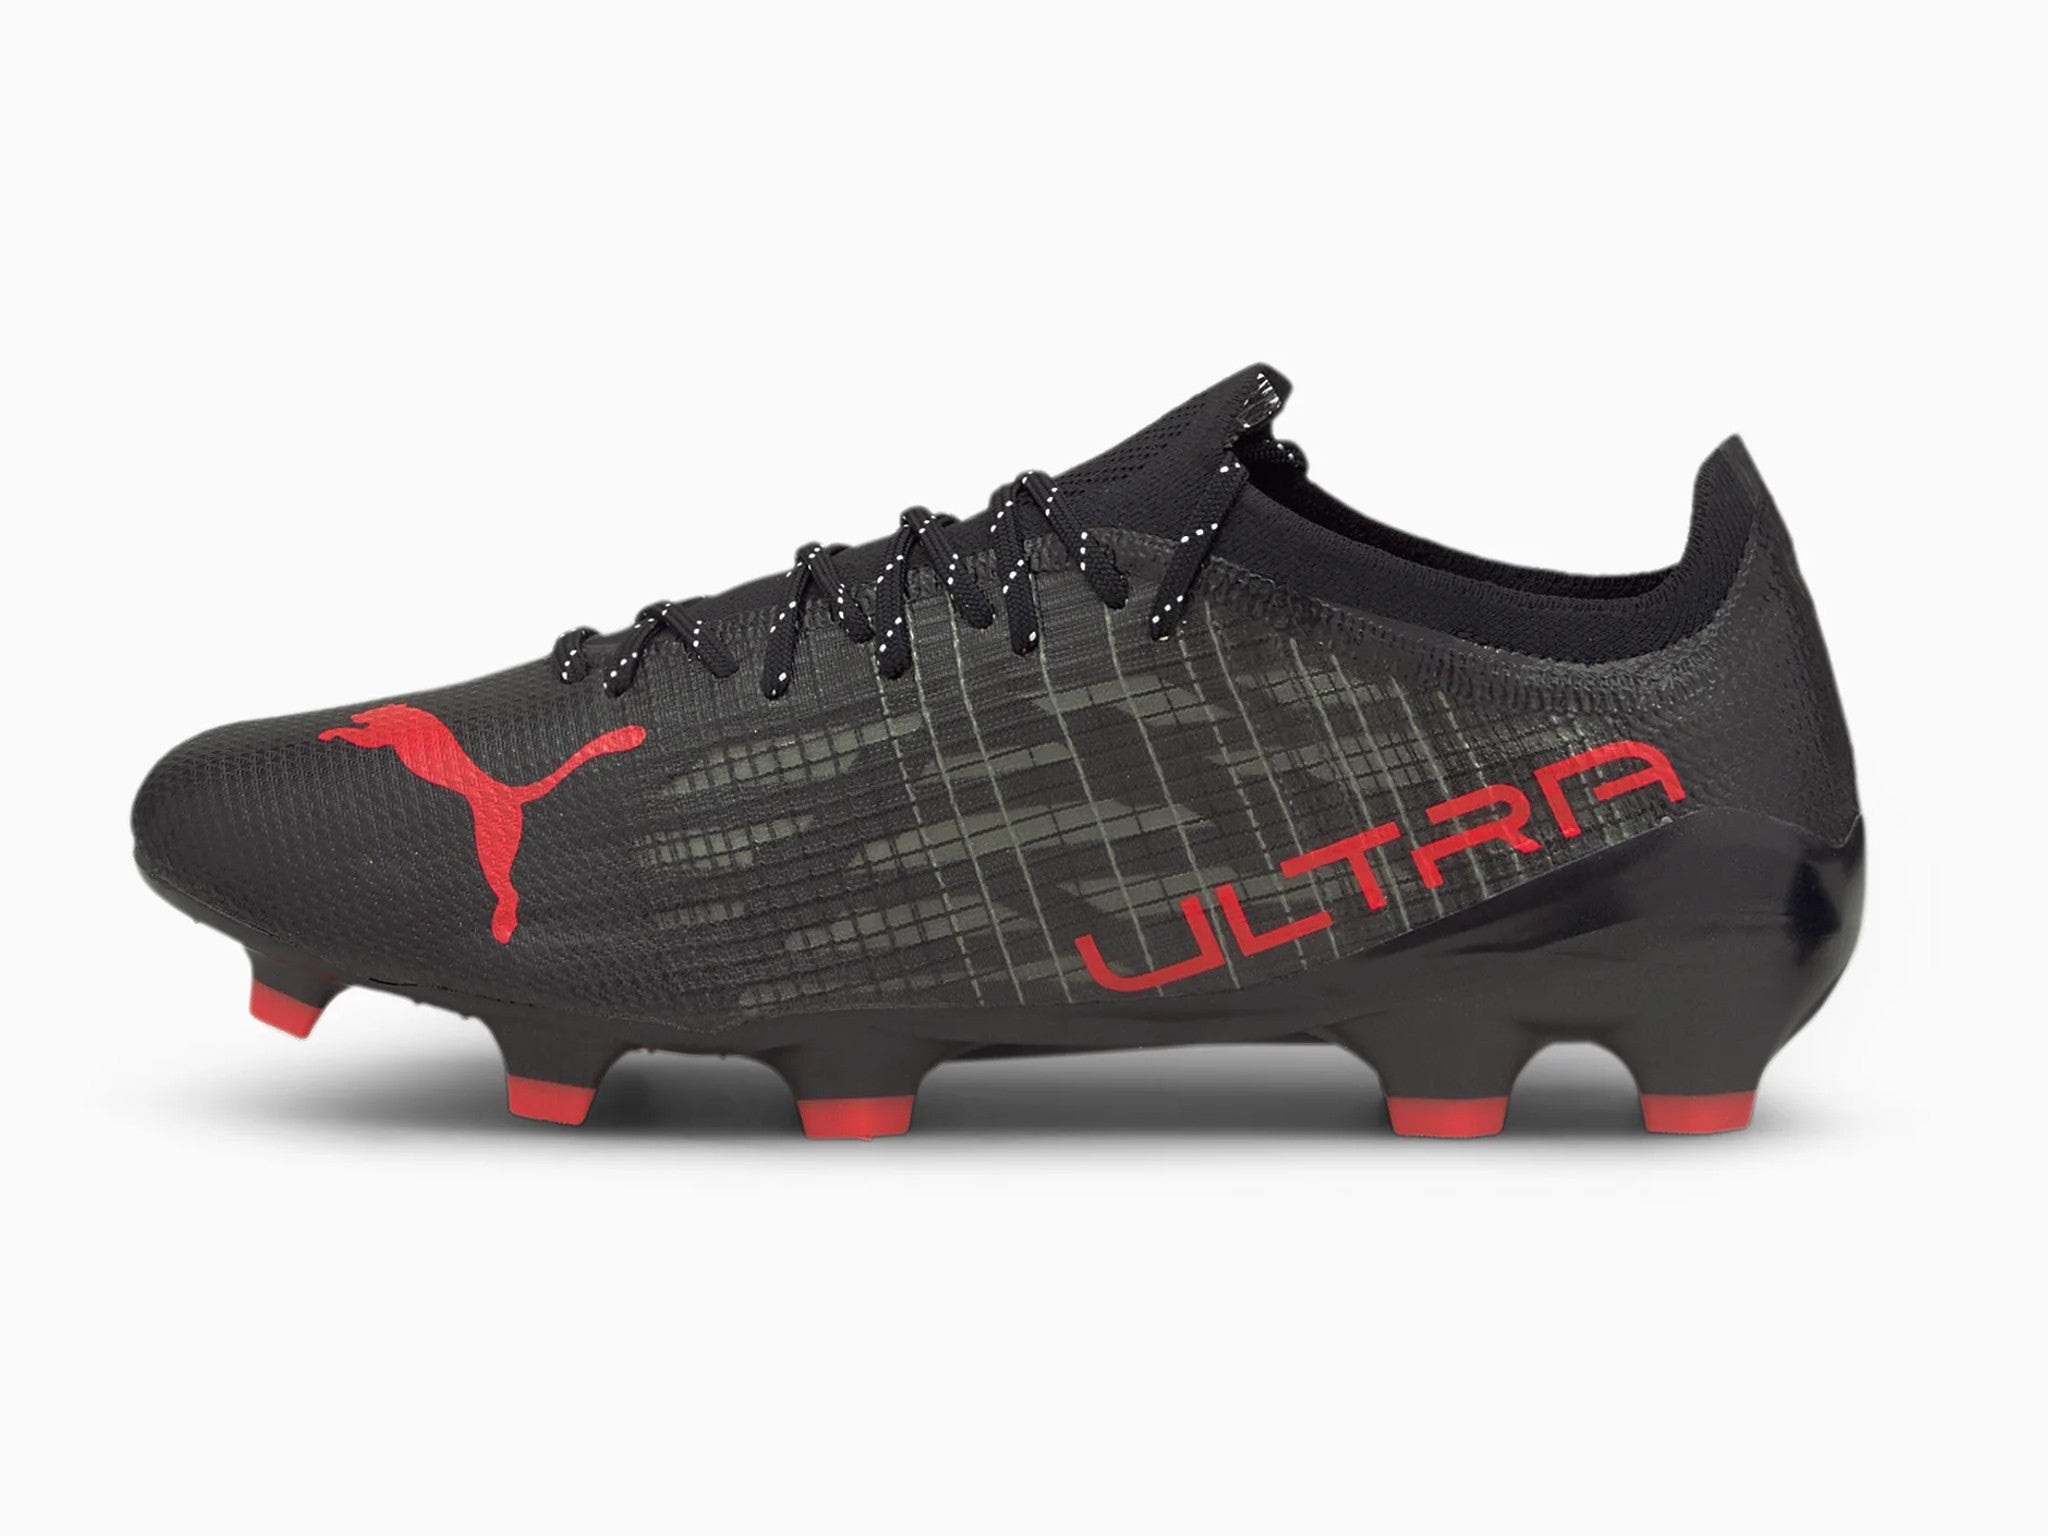 Best astro turf football boots 2021: For playing on 3G and 4G